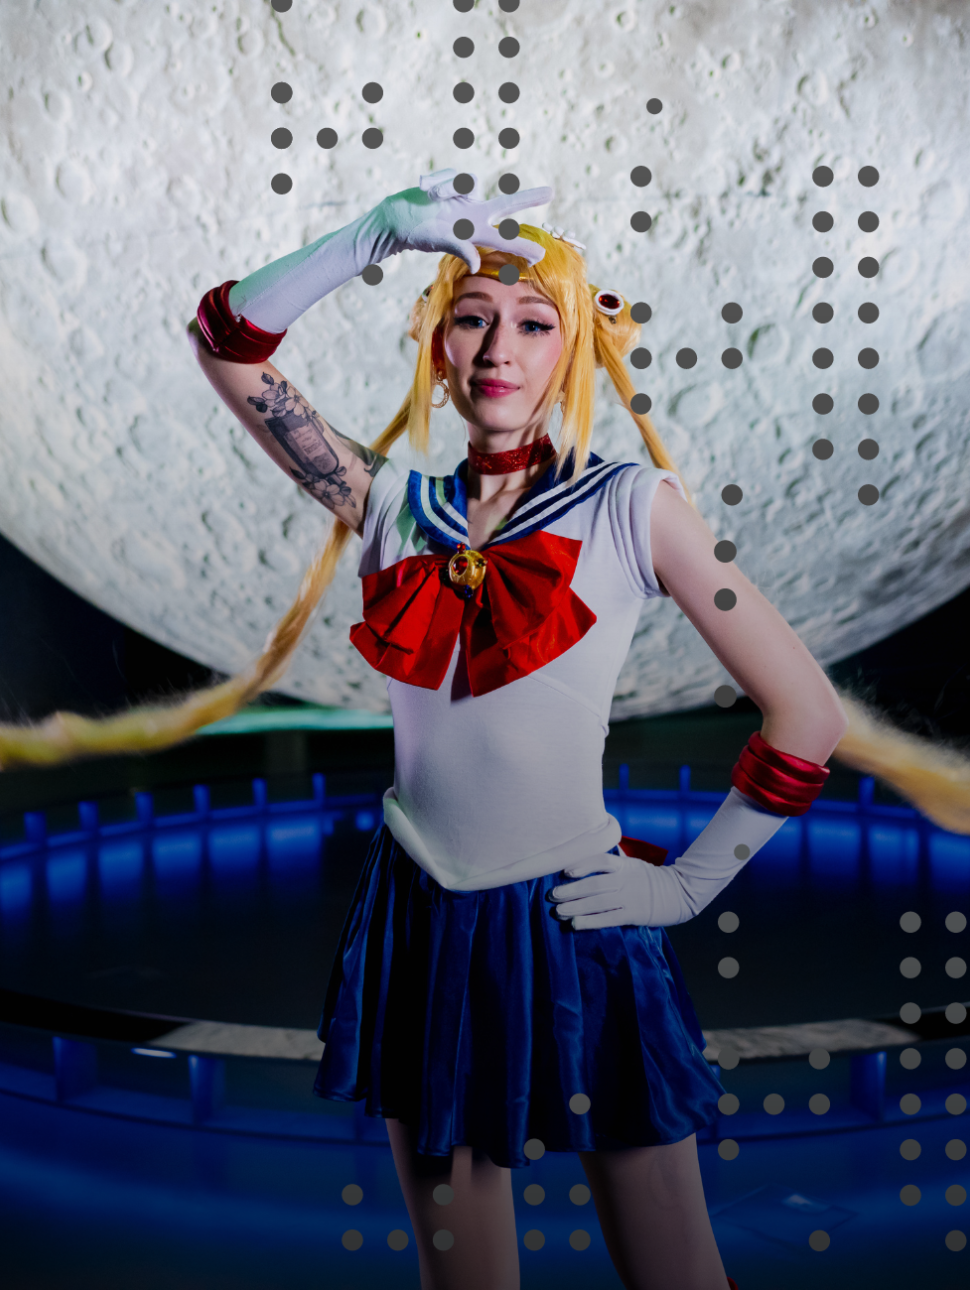 A woman in a sailor outfit posing with a crescent moon in the background.